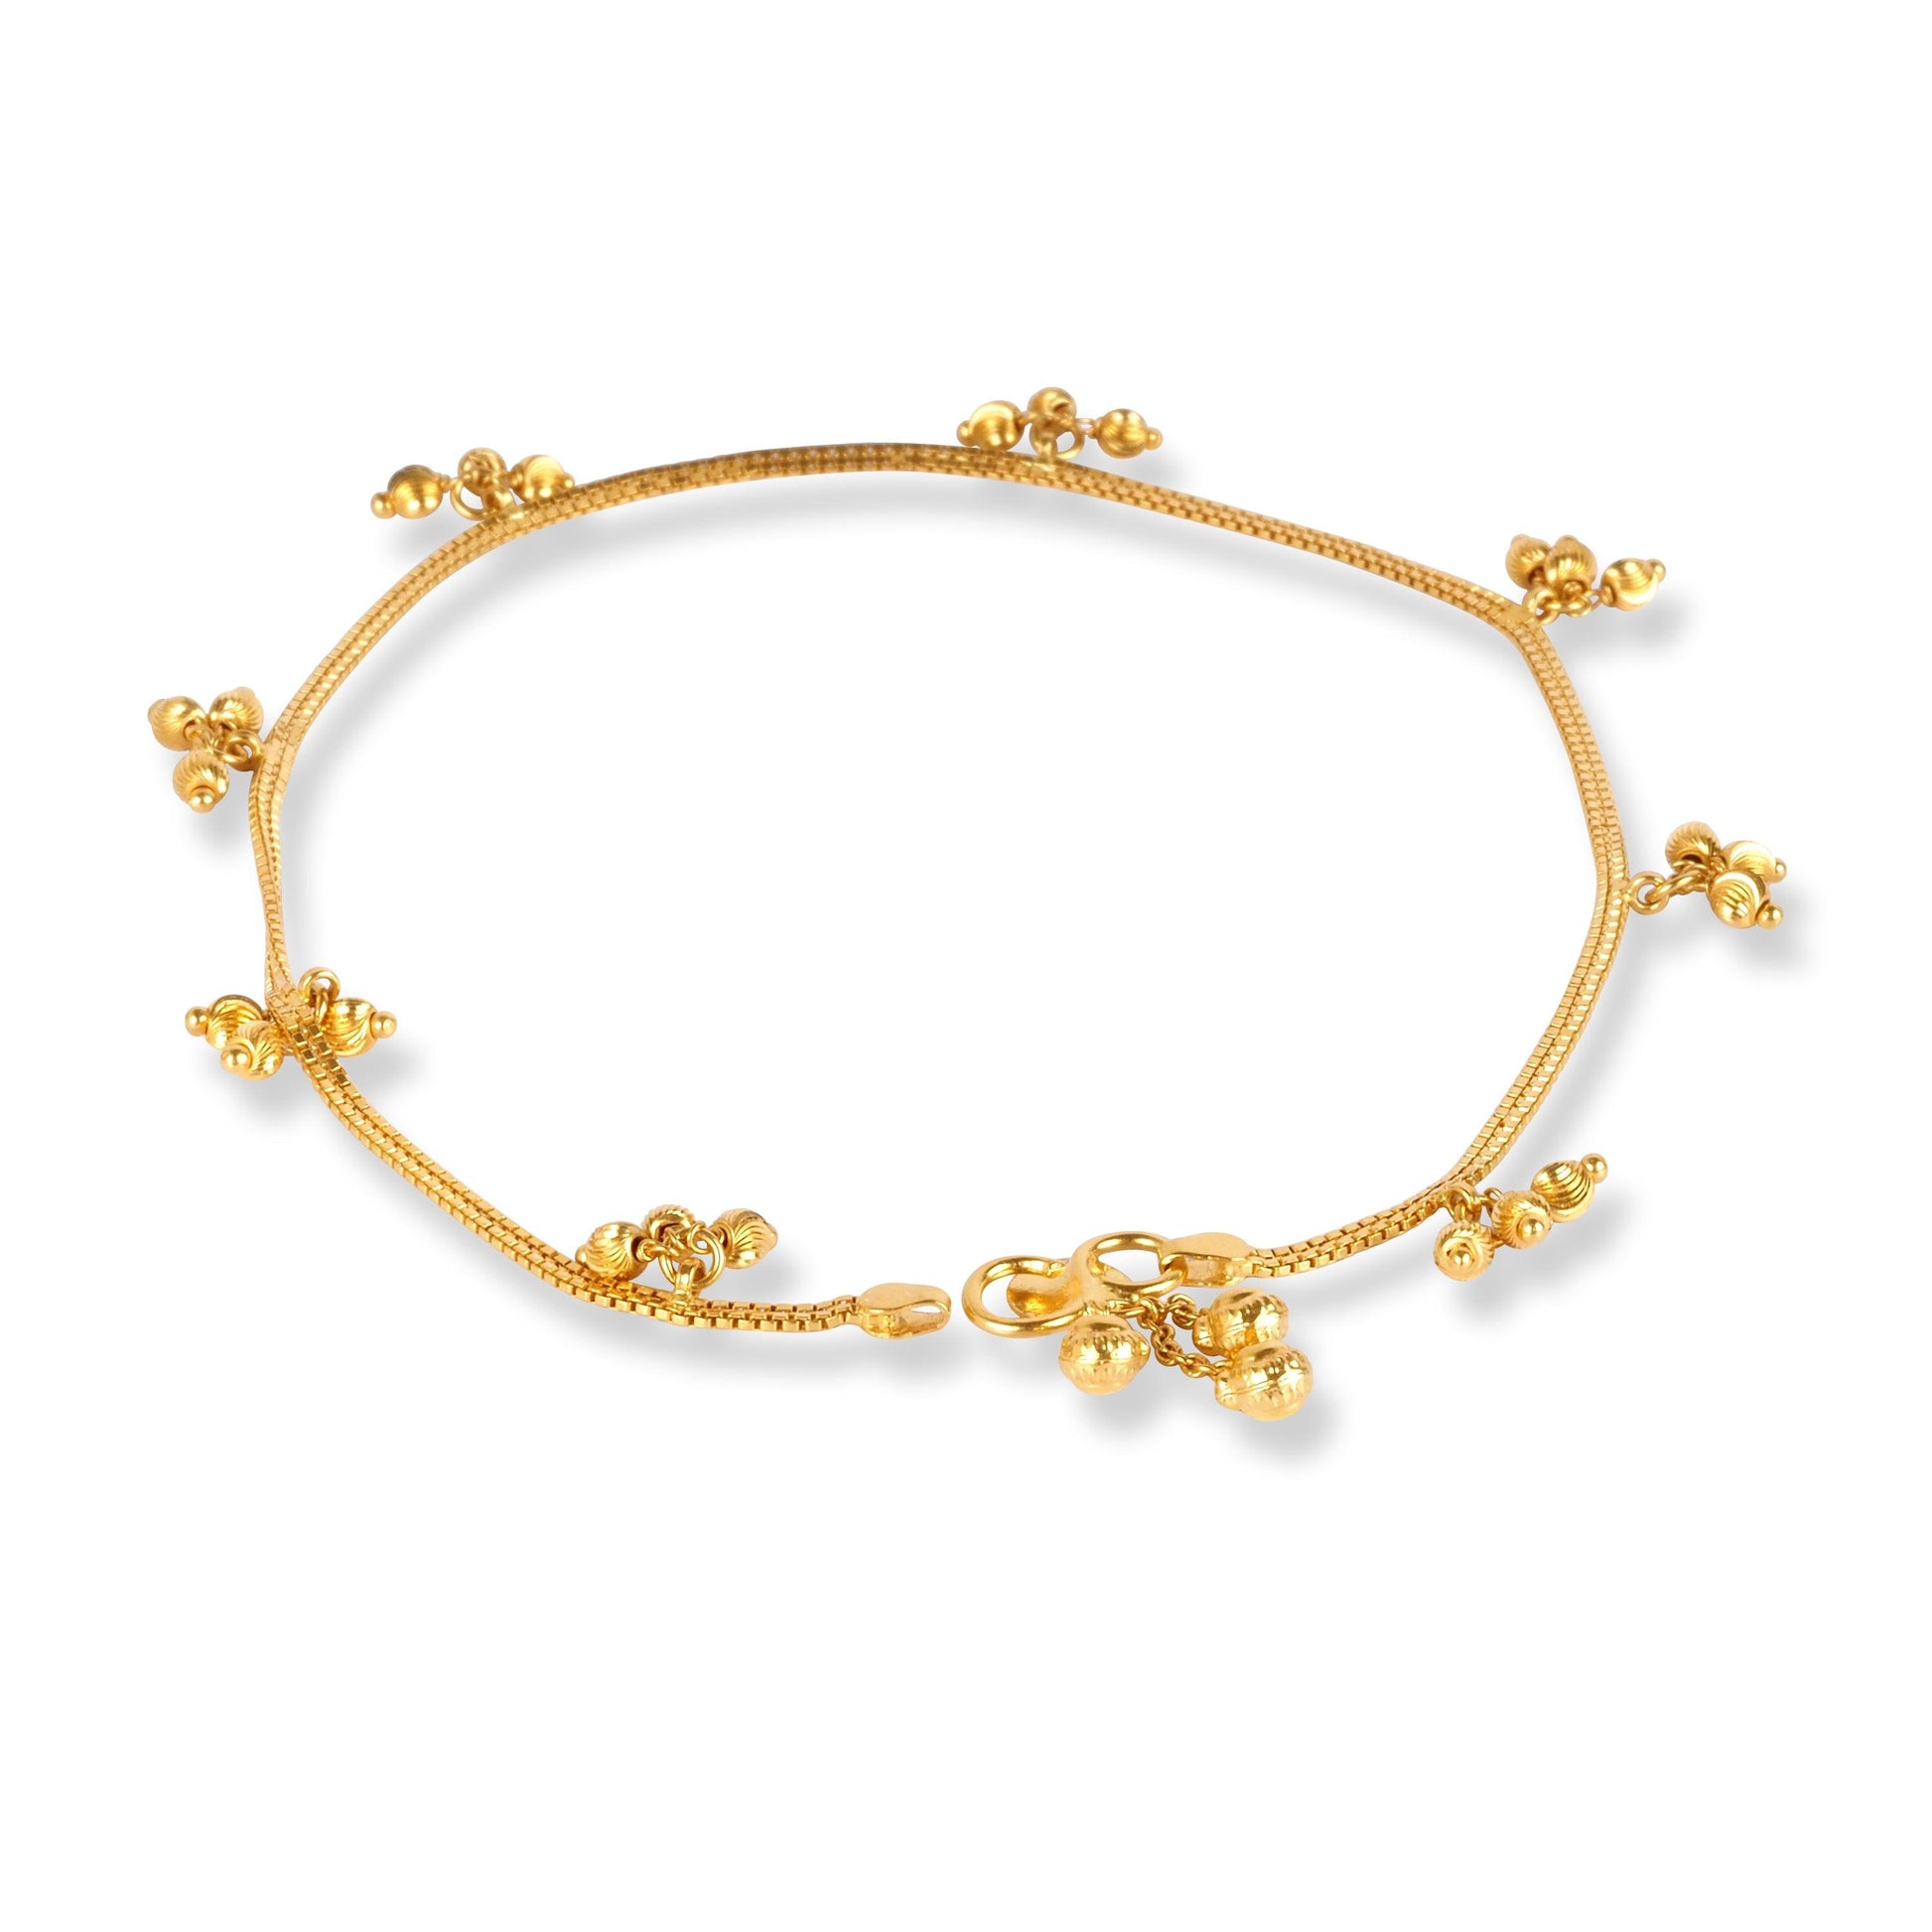 22ct Gold Anklet in Box Chain Design with Ghughri Charm with '' S '' Clasp A-8267 - Minar Jewellers